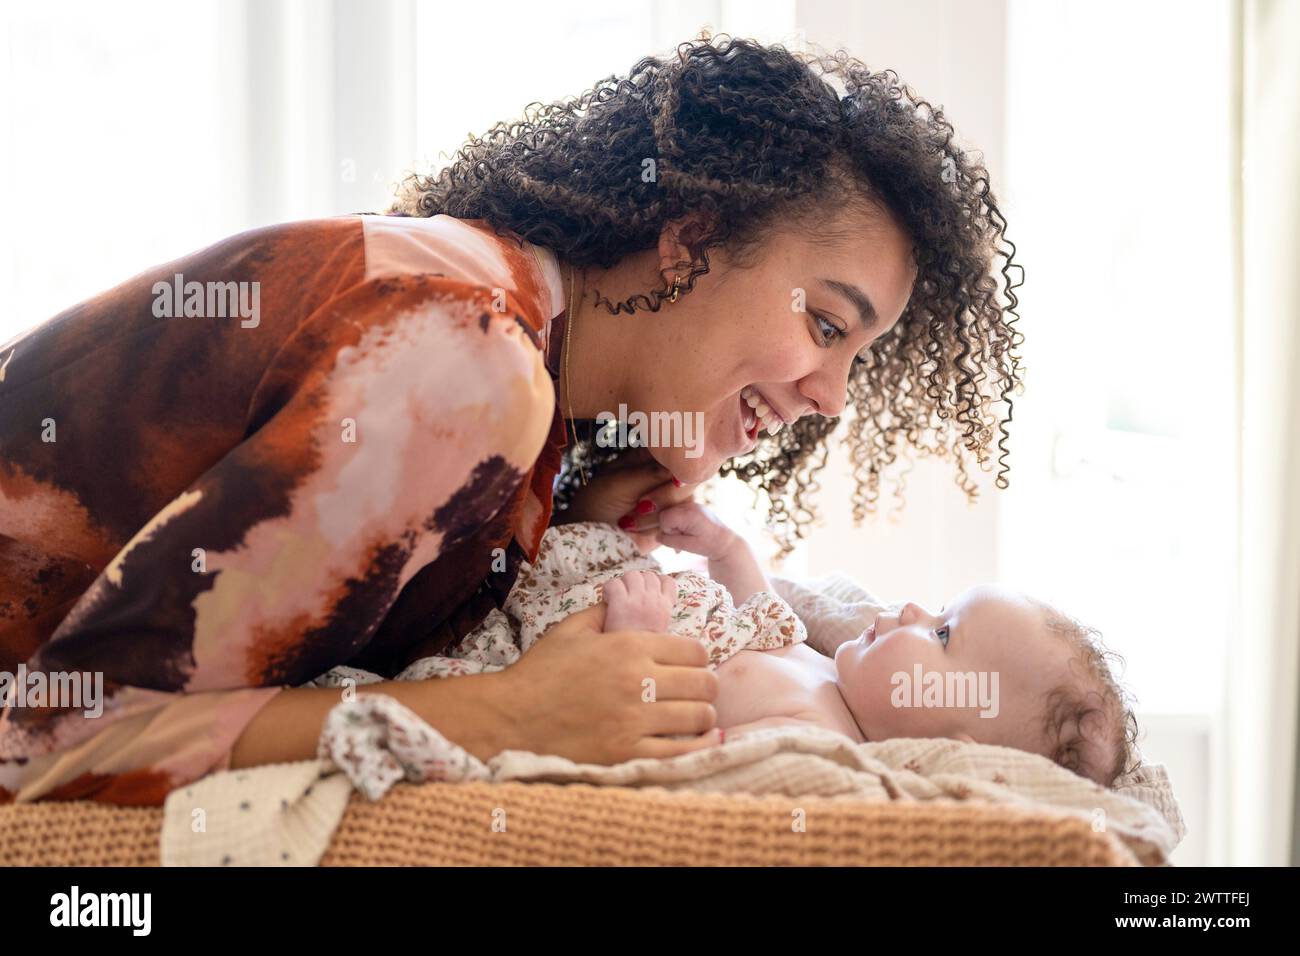 A joyful moment between mother and baby bathed in soft light. Stock Photo